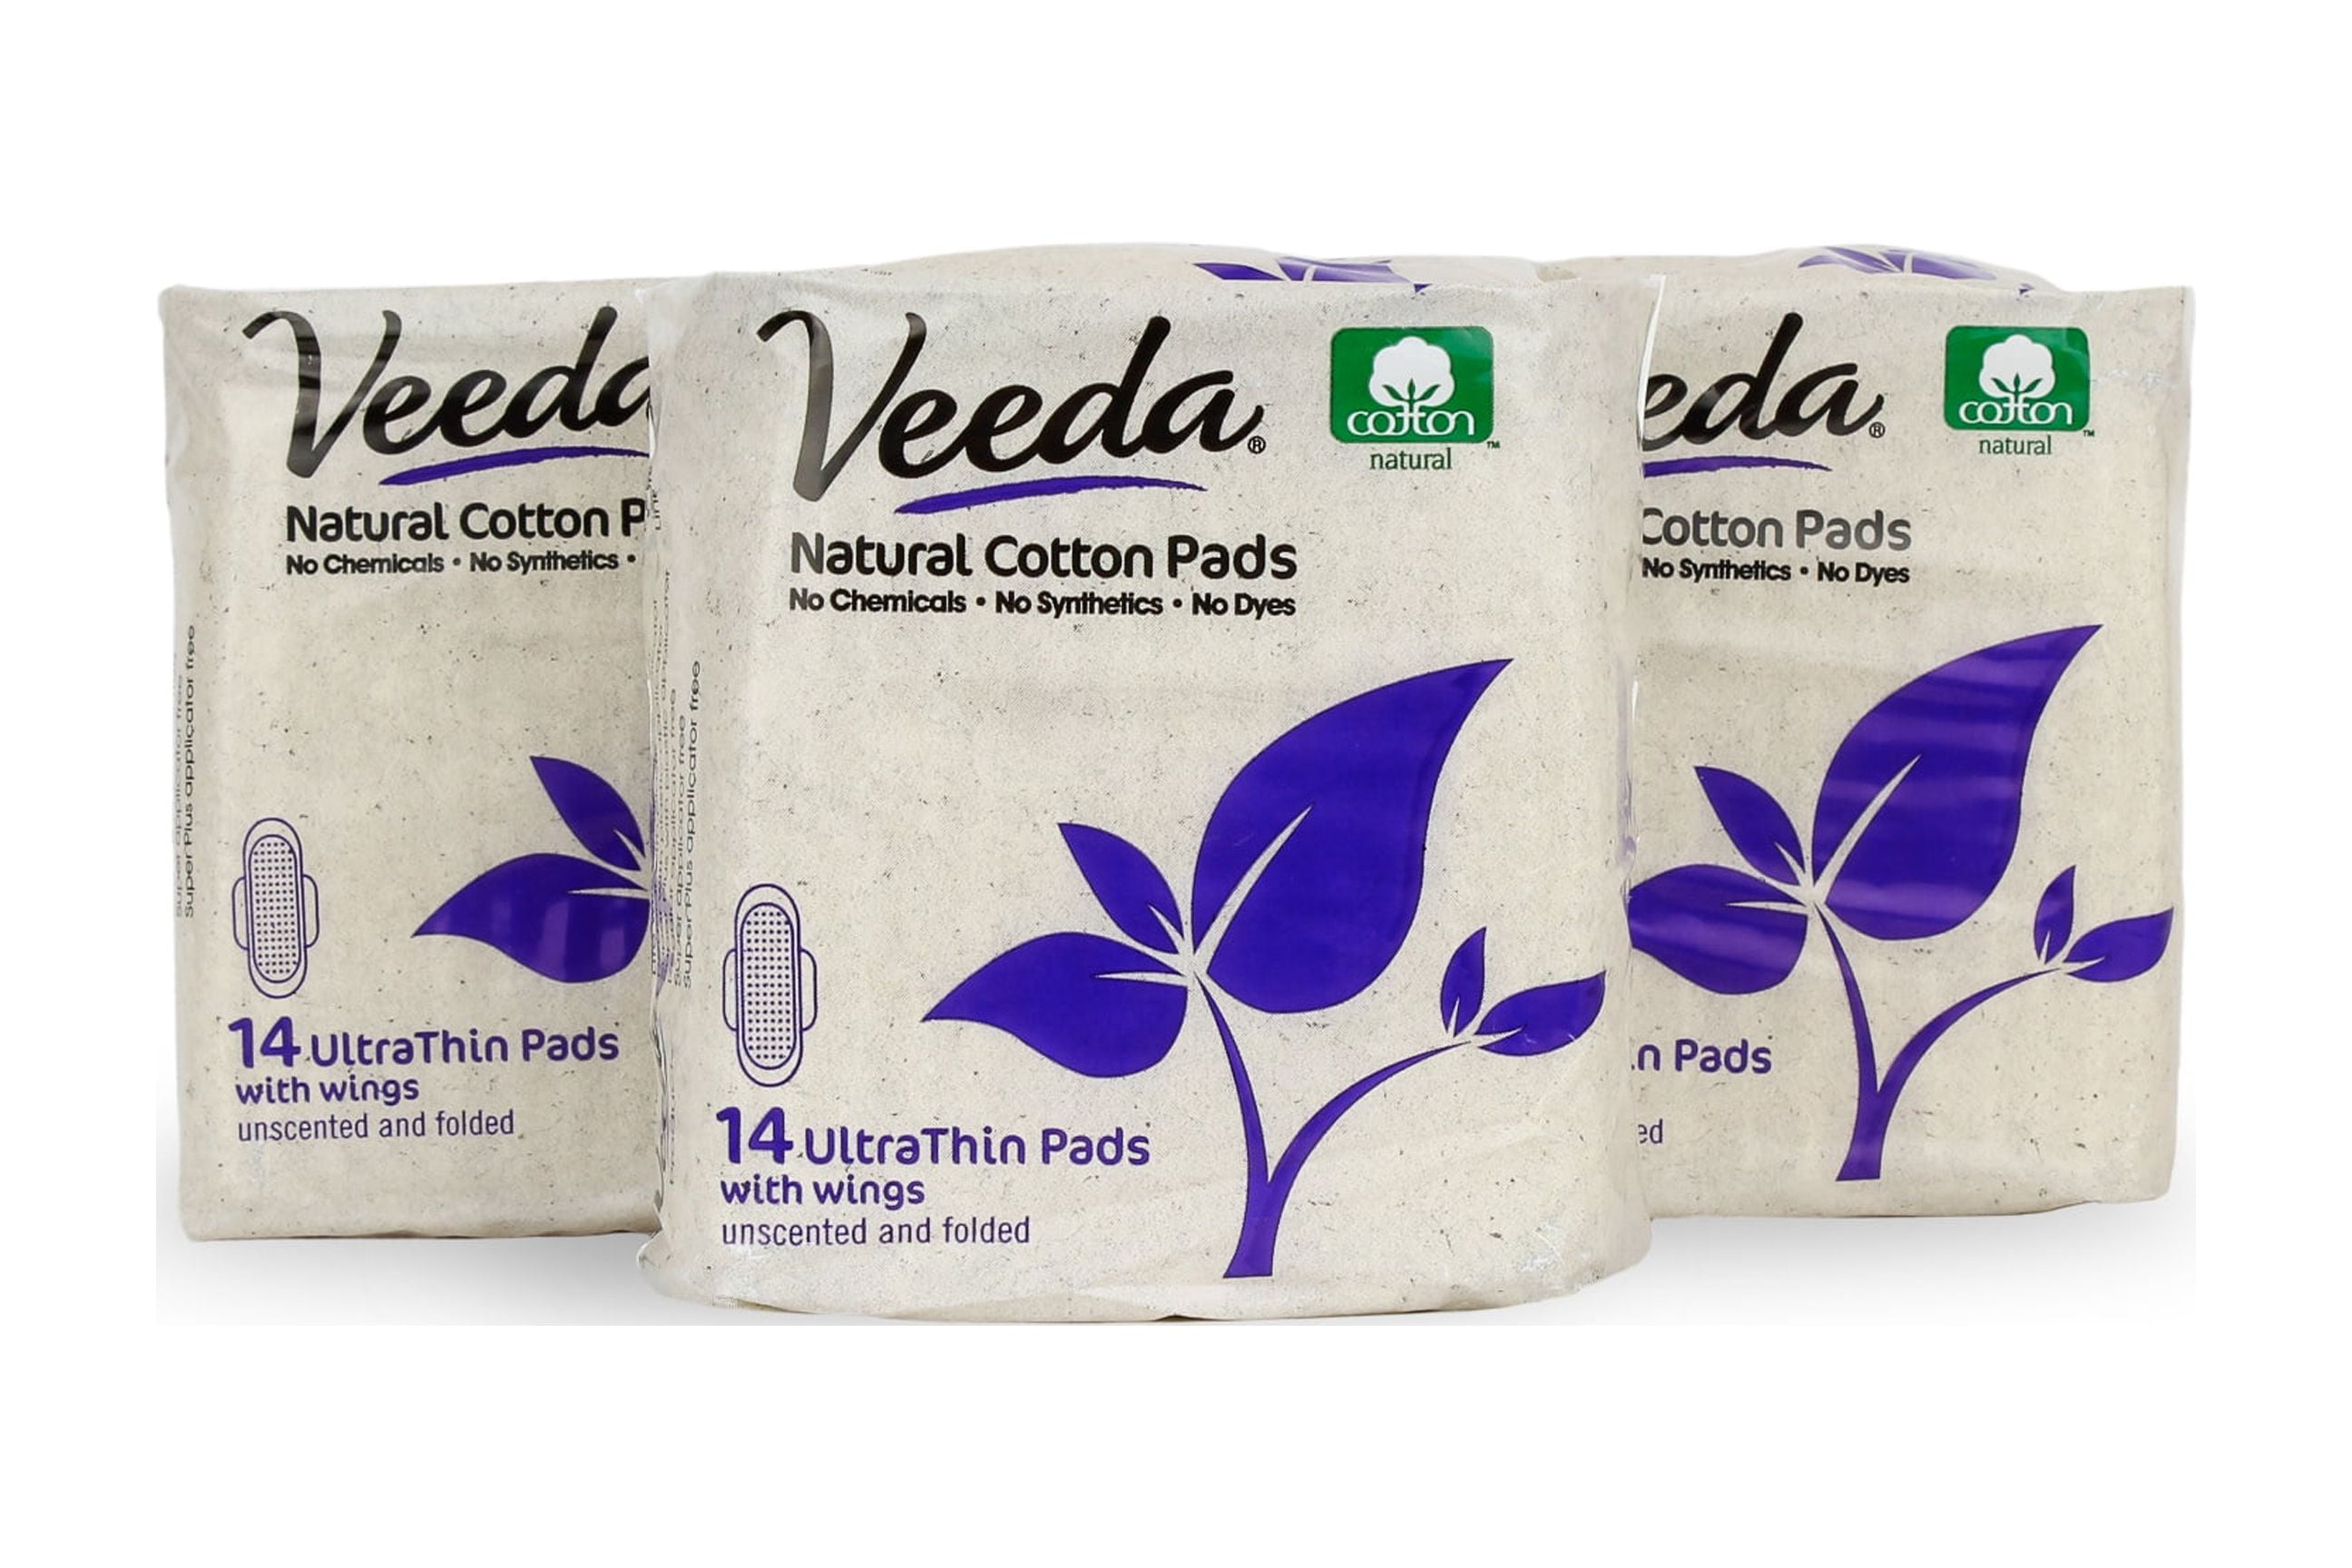  Veeda Natural Cotton Day Pads For Women, Hypoallergenic,  Chlorine And Fragrance Free, Ultra-Thin Pads